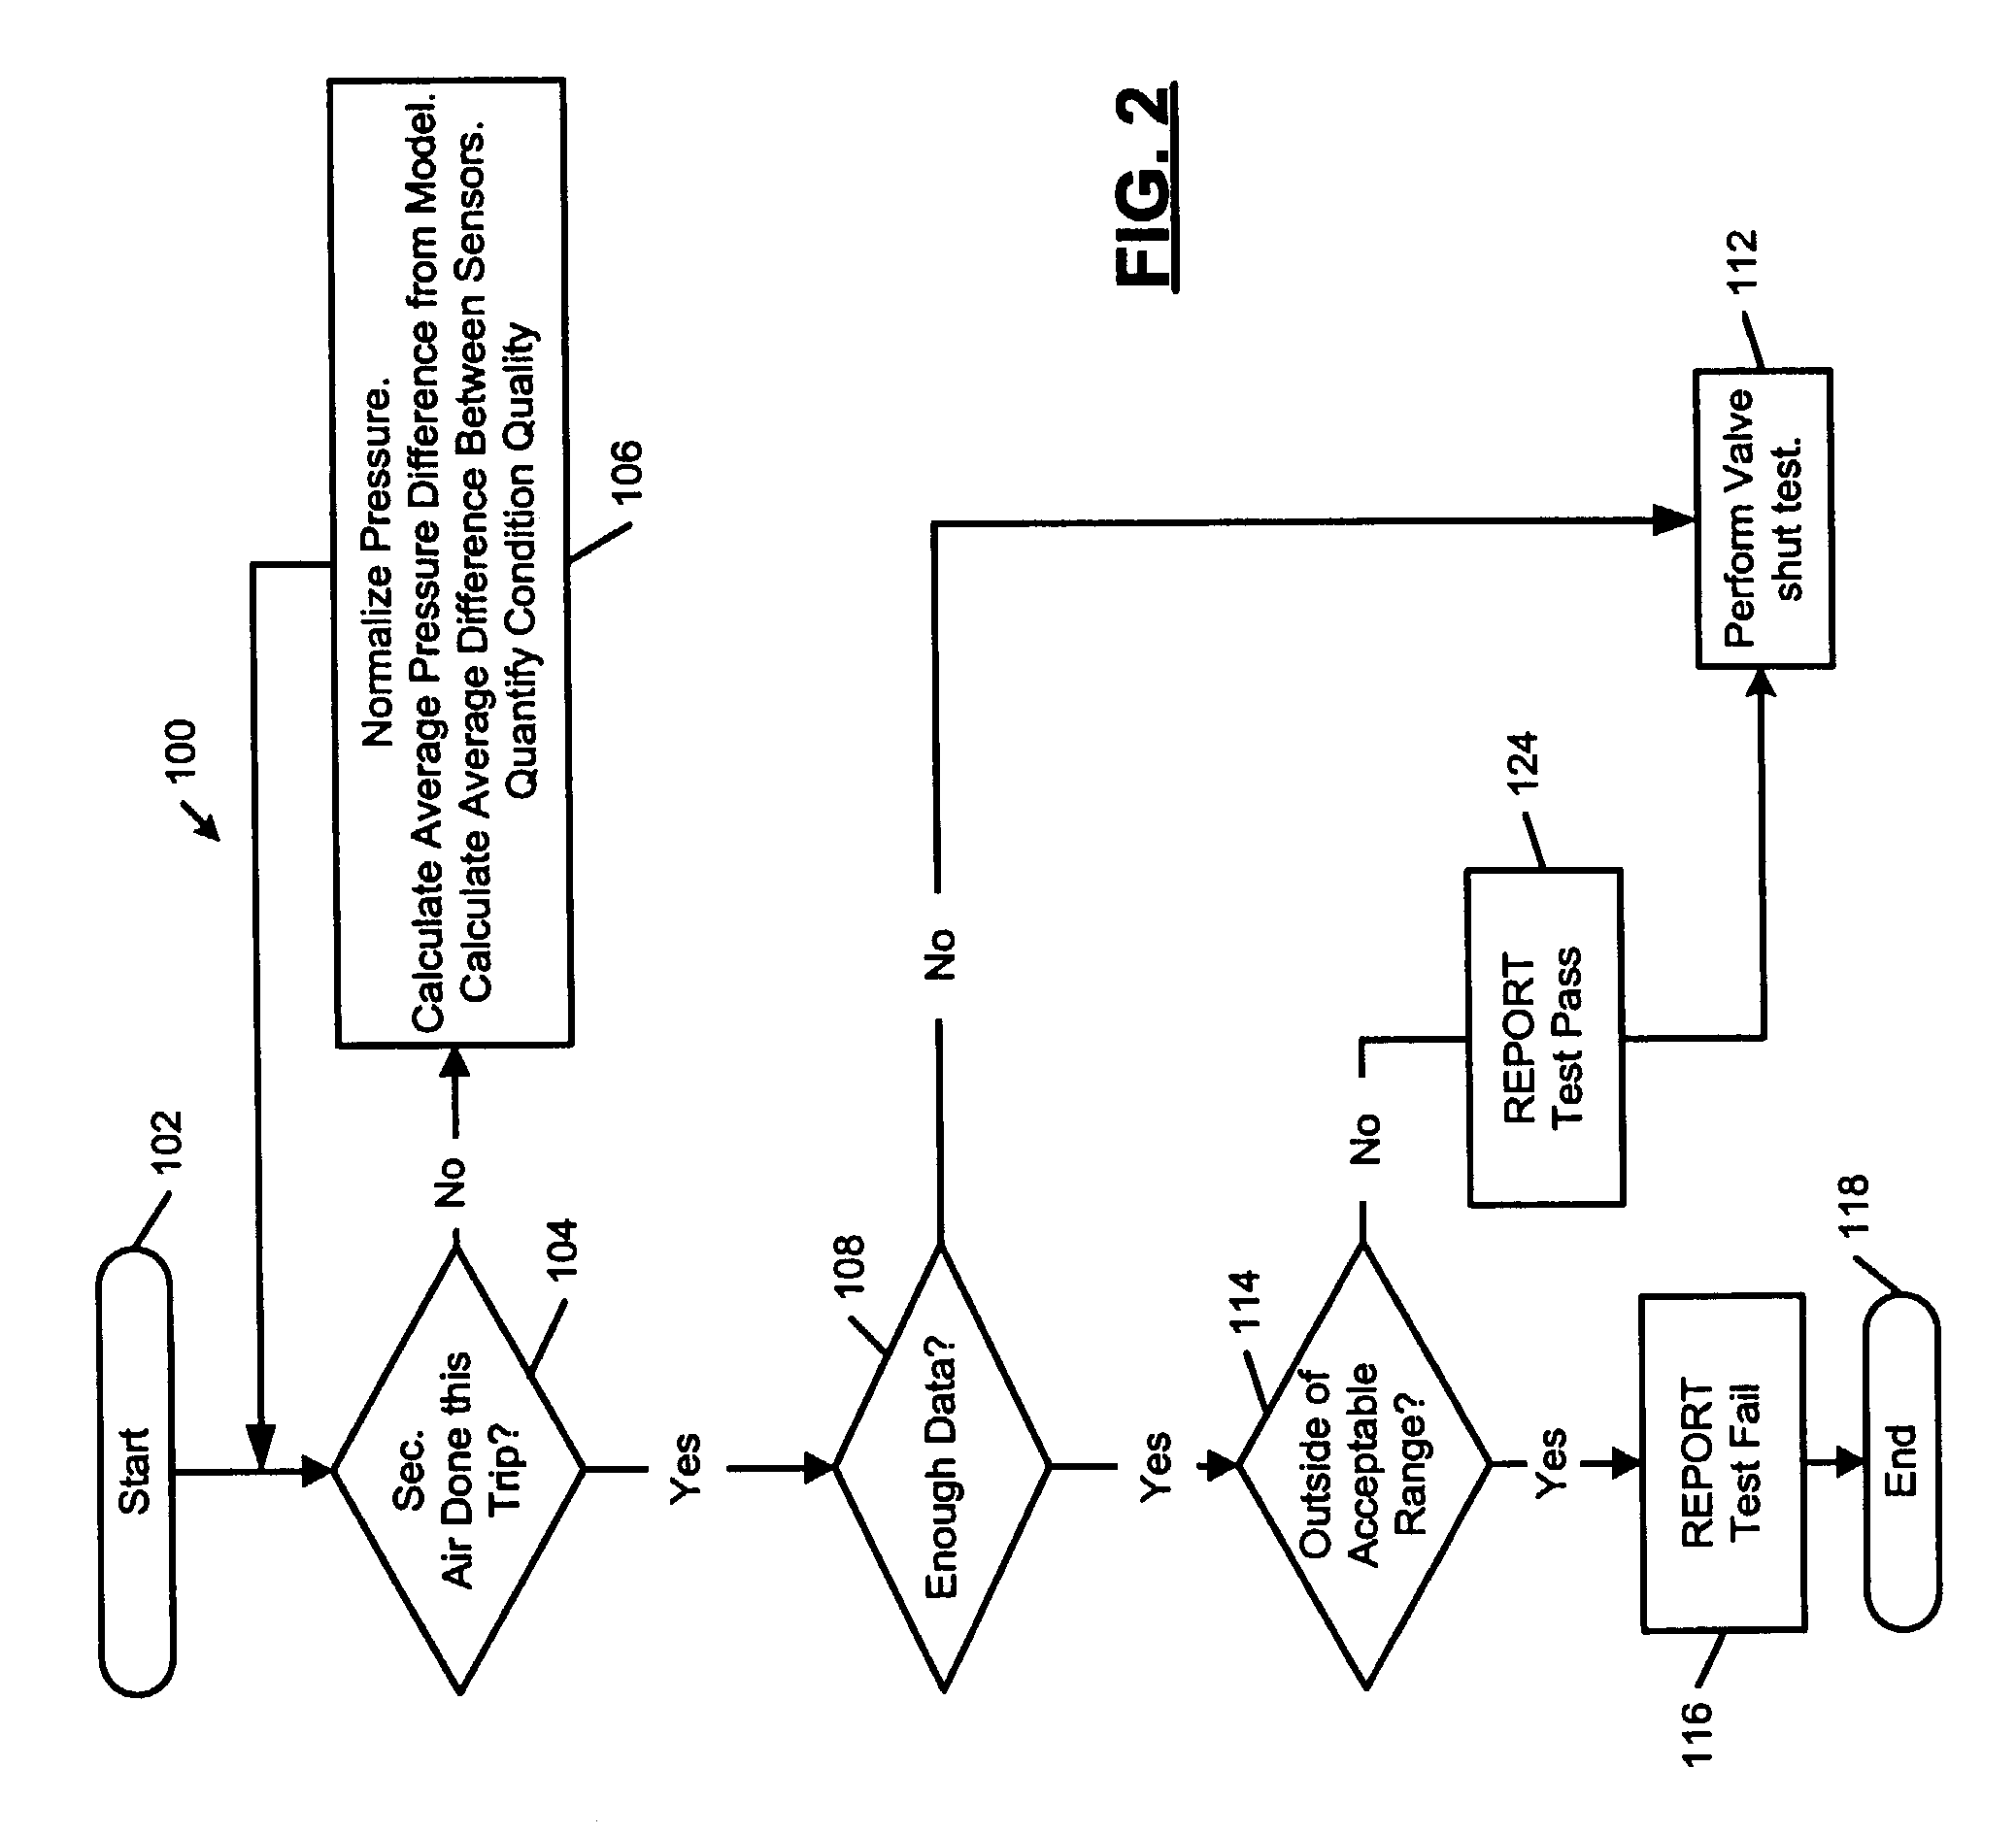 Secondary air injection diagnostic system using pressure feedback